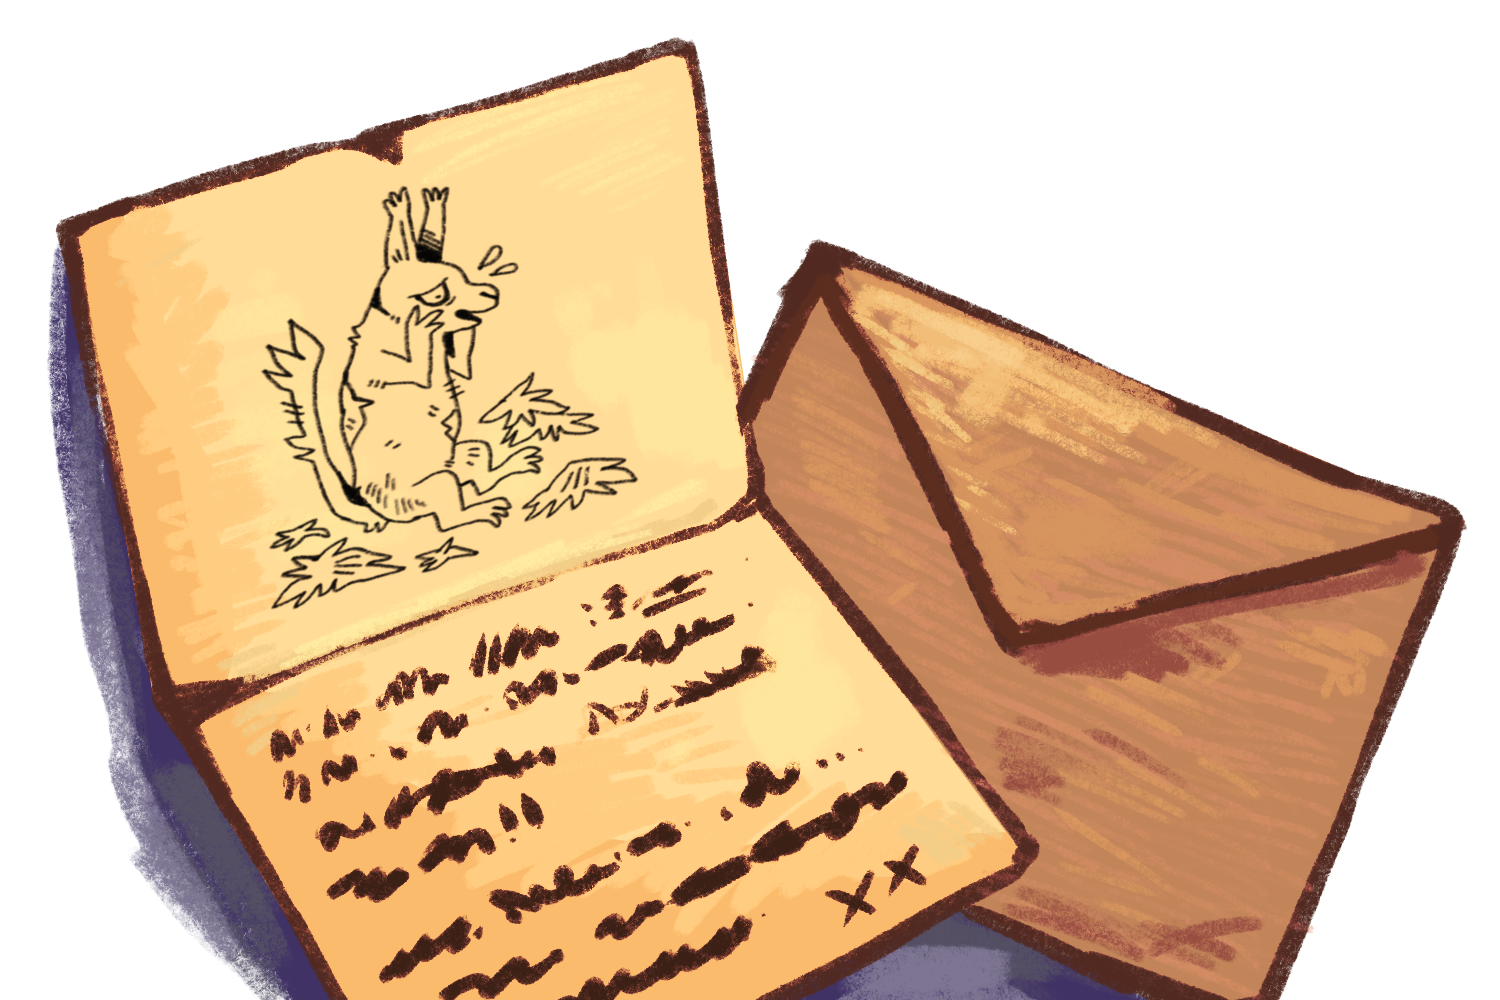 Image. A drawing of an open letter laid on a closed envelope. The letter has an illustration of a sad looking beast with shedding fur.